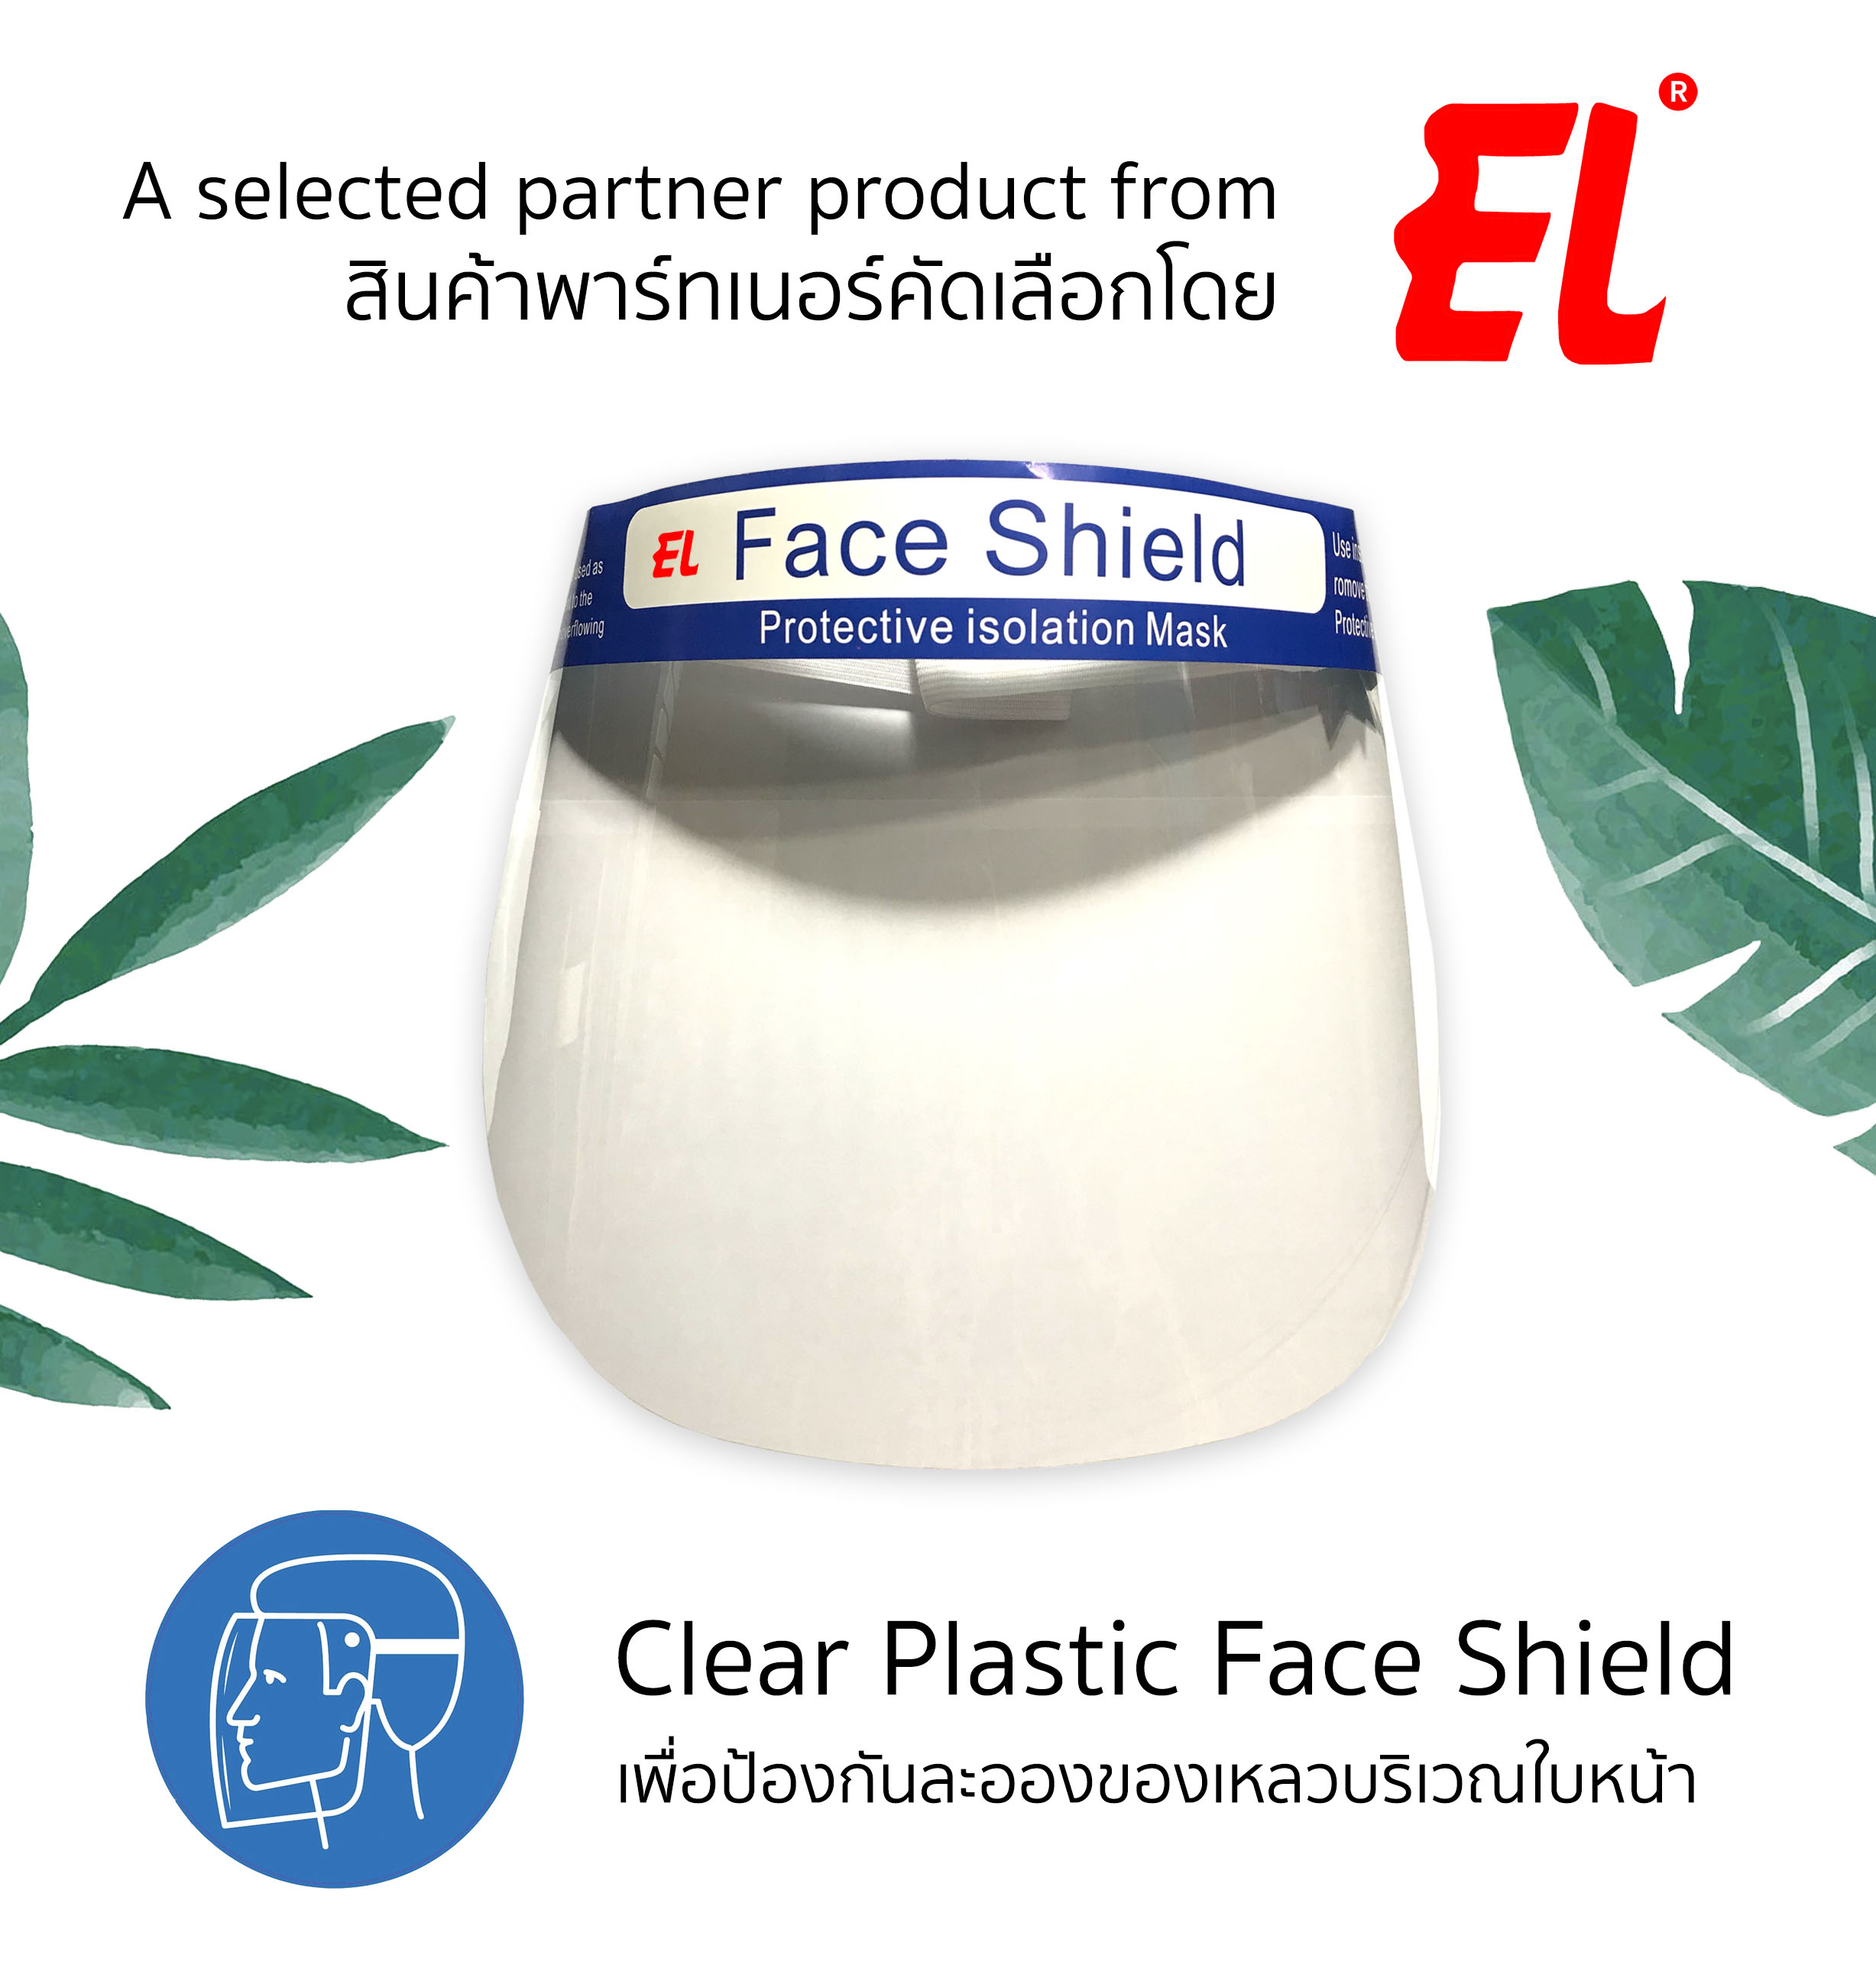 Face Shield (Partner Product)